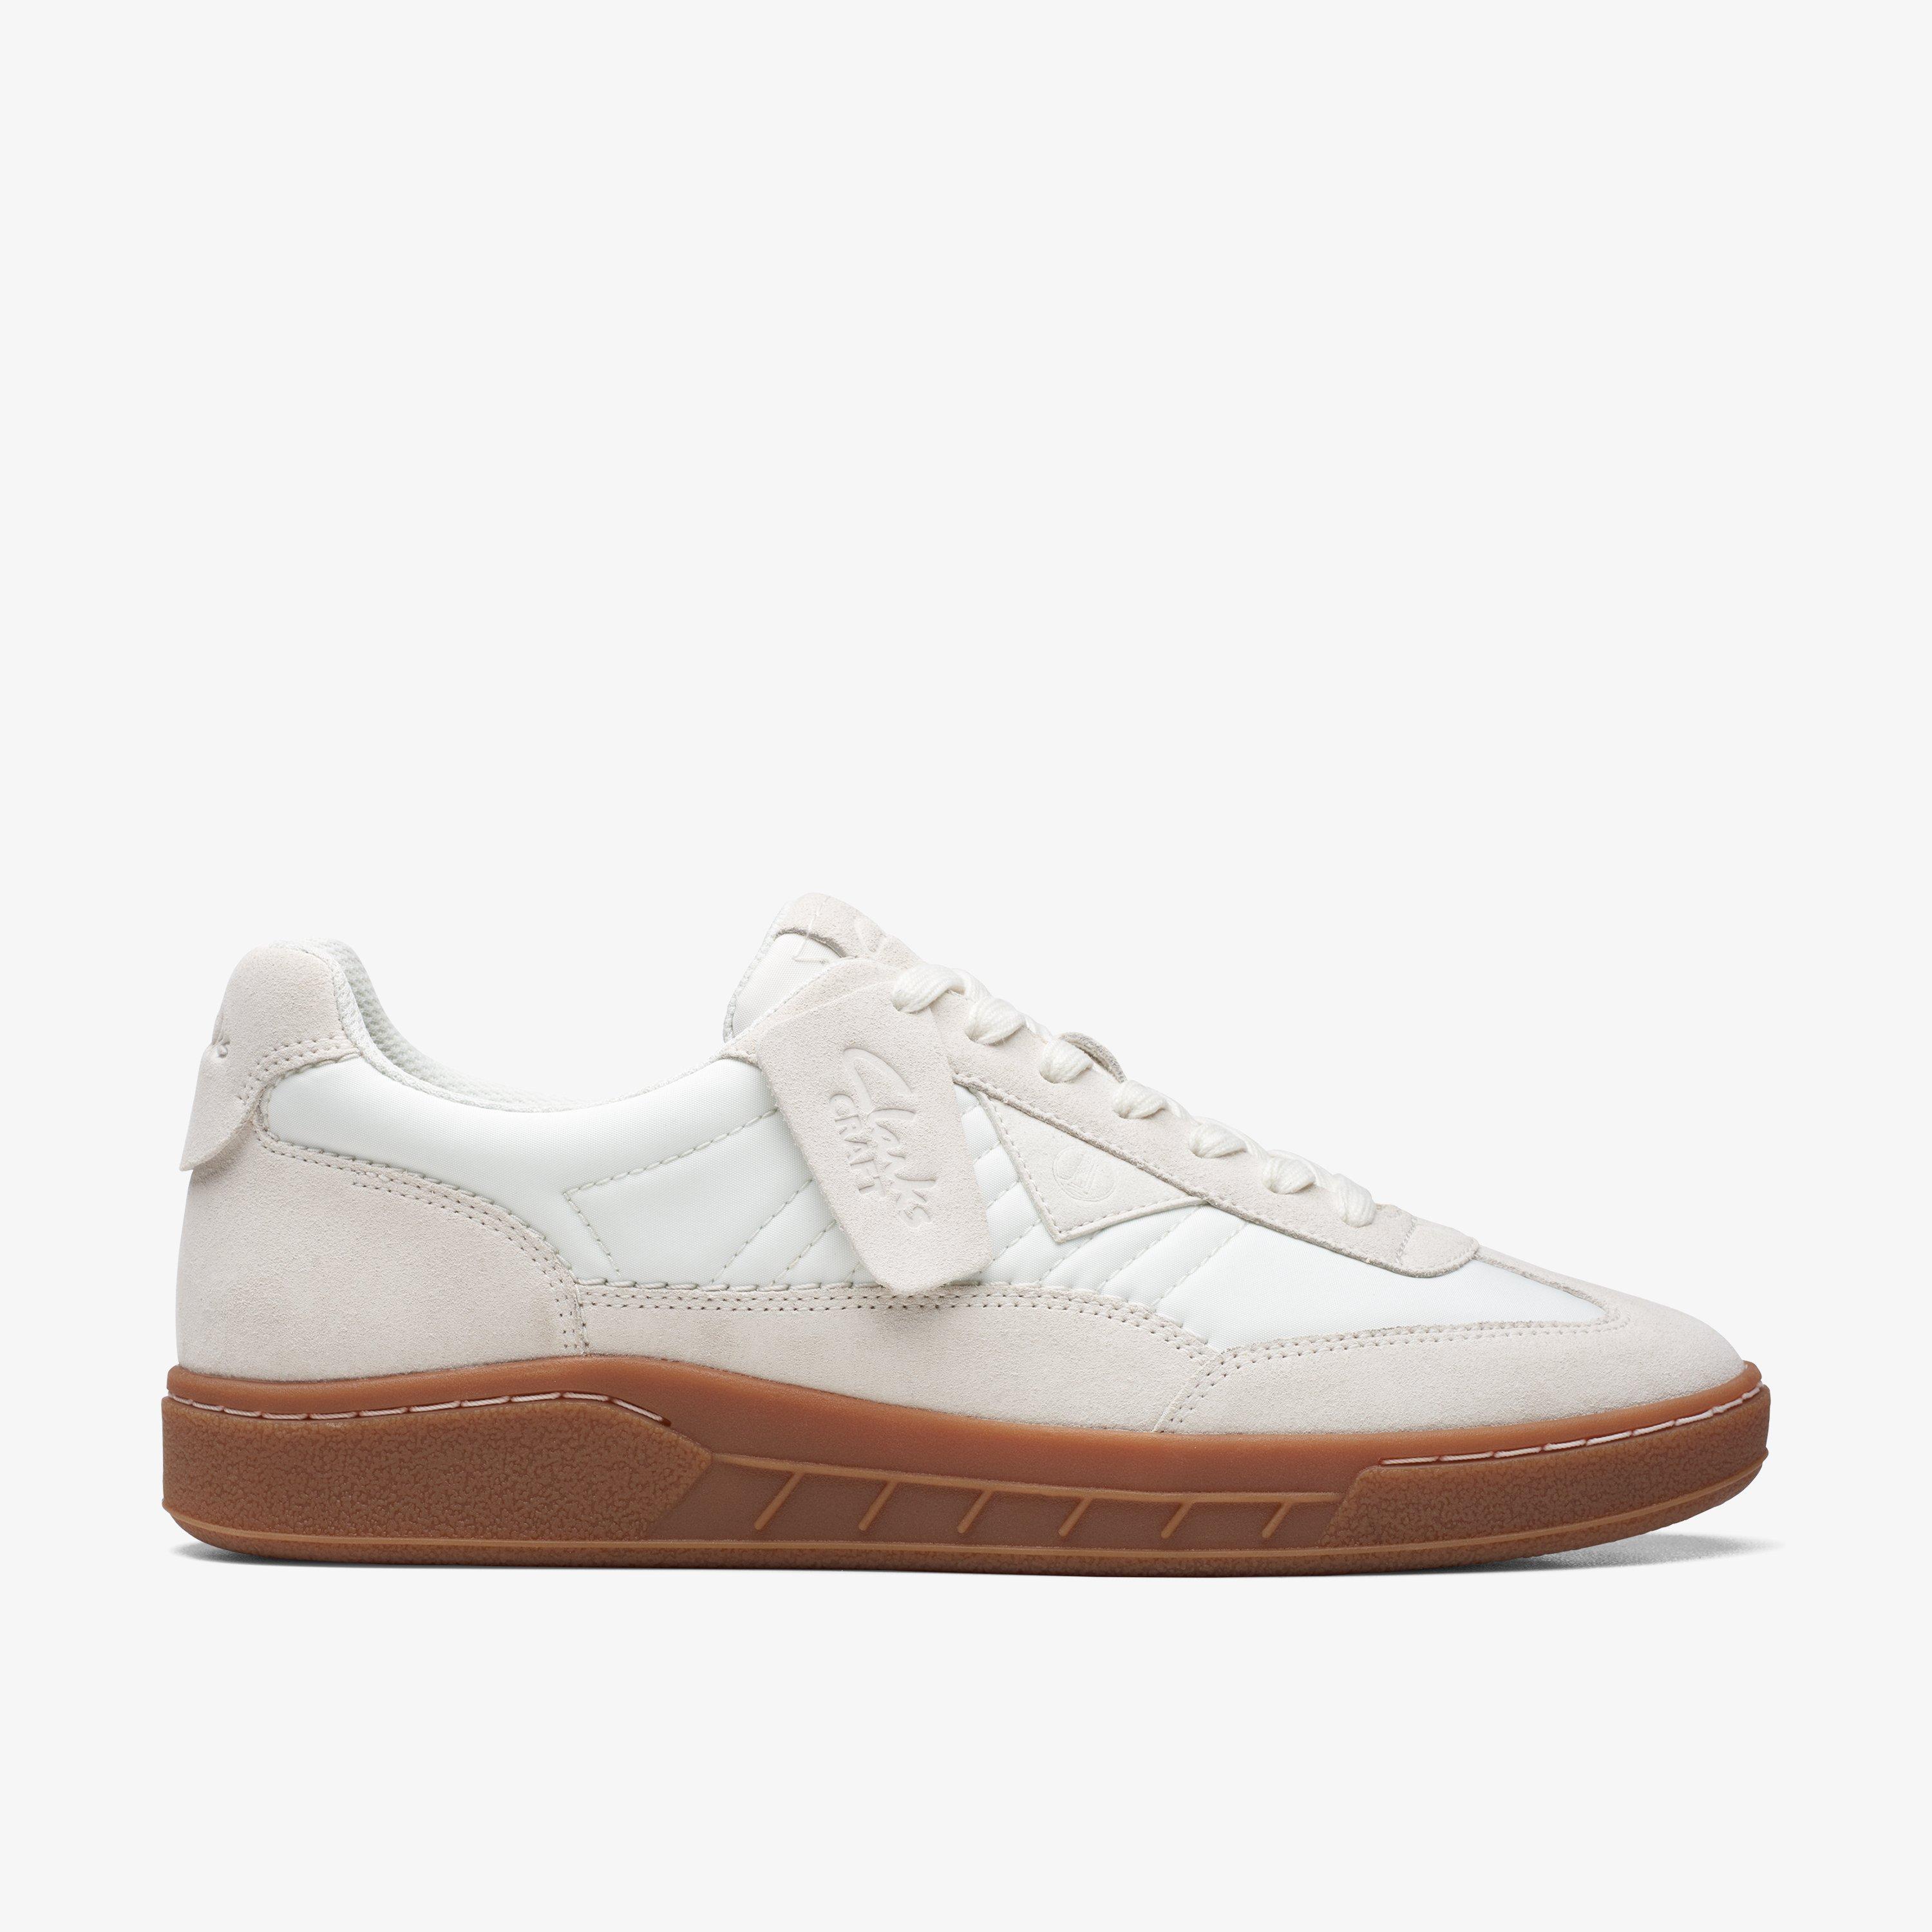 MENS Craft Rally Ace Off White Combination Trainers | Clarks Outlet